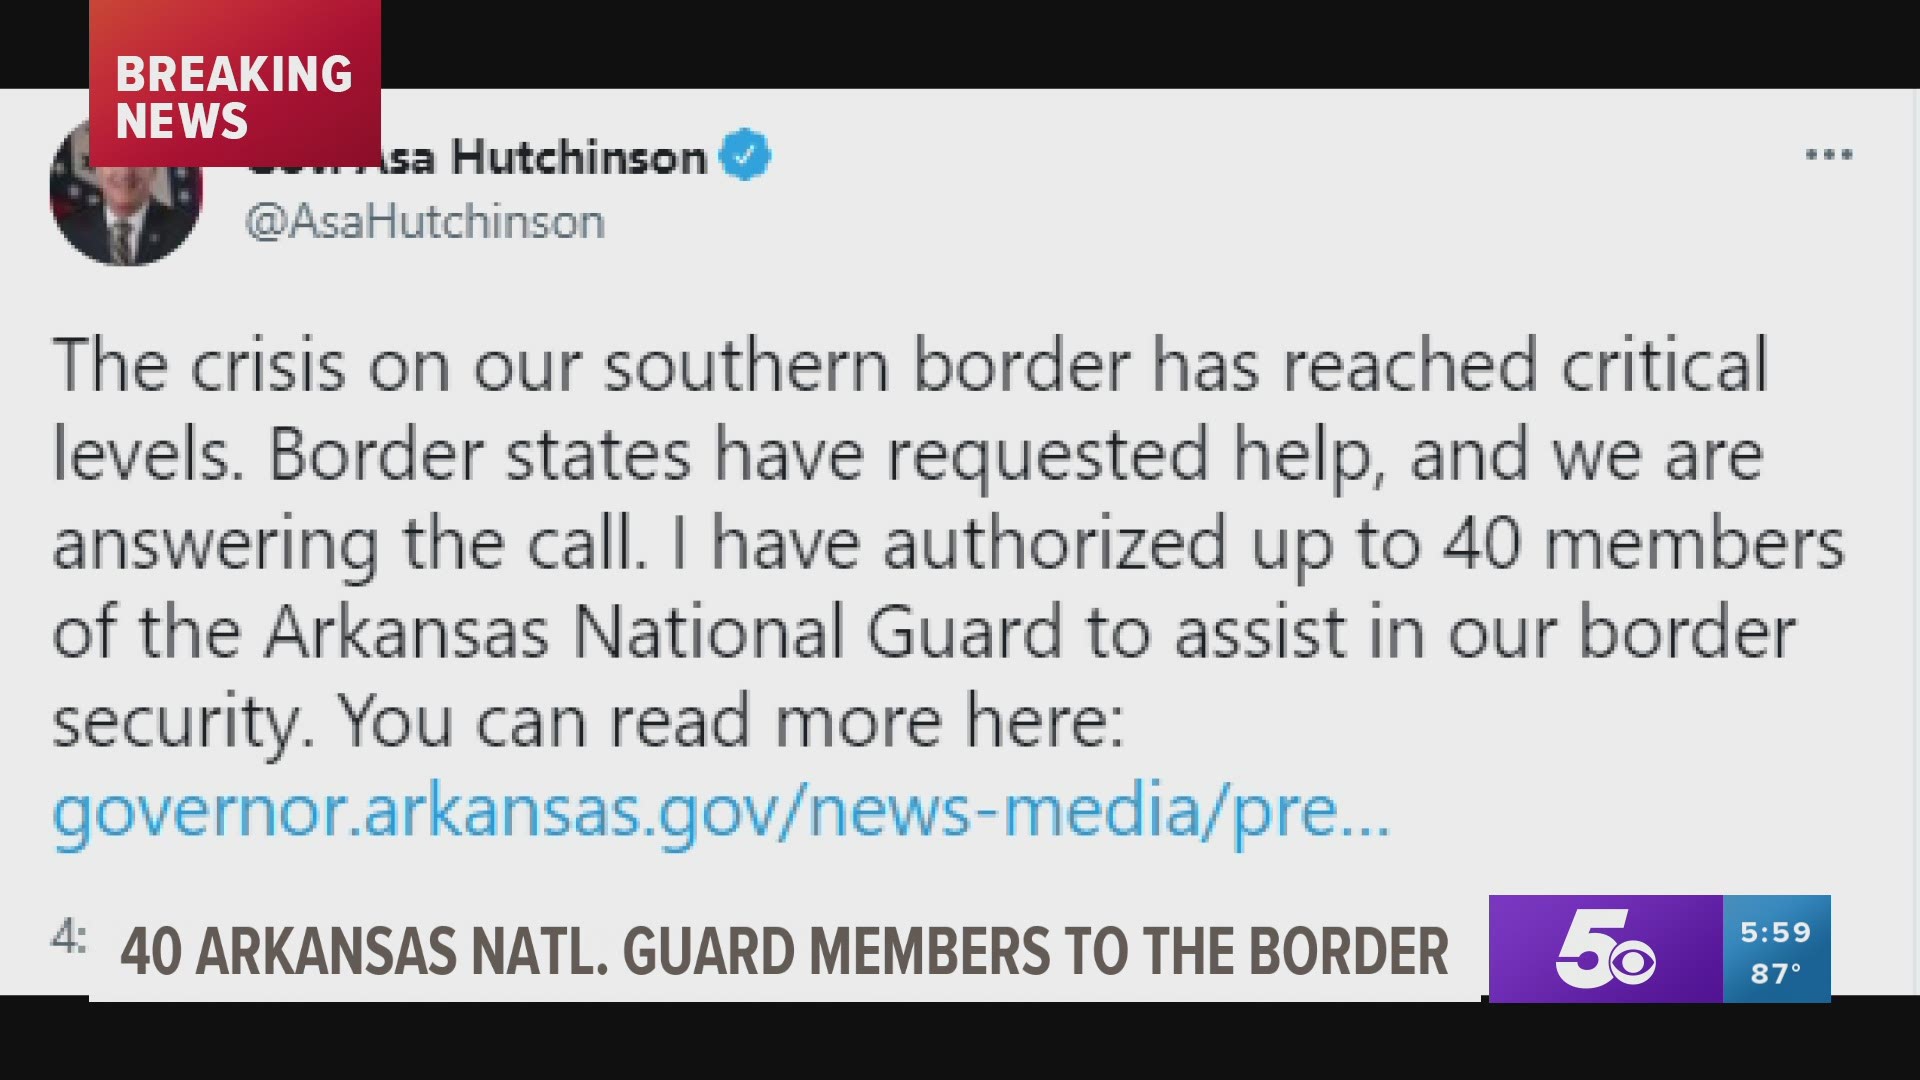 Gov. Asa Hutchinson authorized 40 Arkansas National Guard members to deploy to the US southern border at the request of Texas.